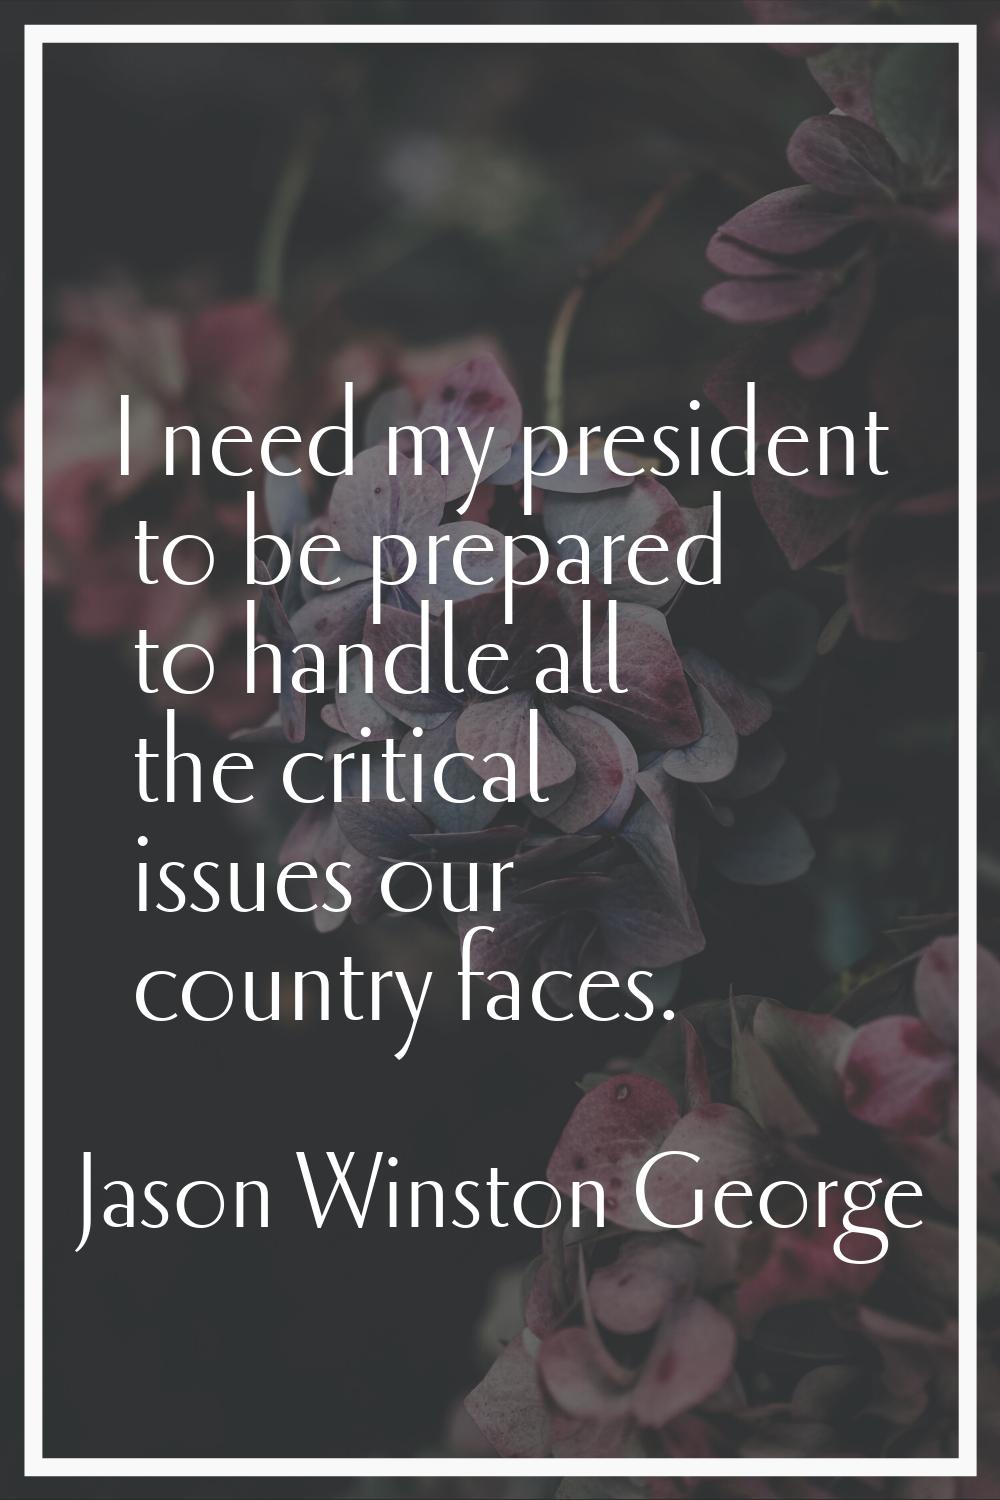 I need my president to be prepared to handle all the critical issues our country faces.